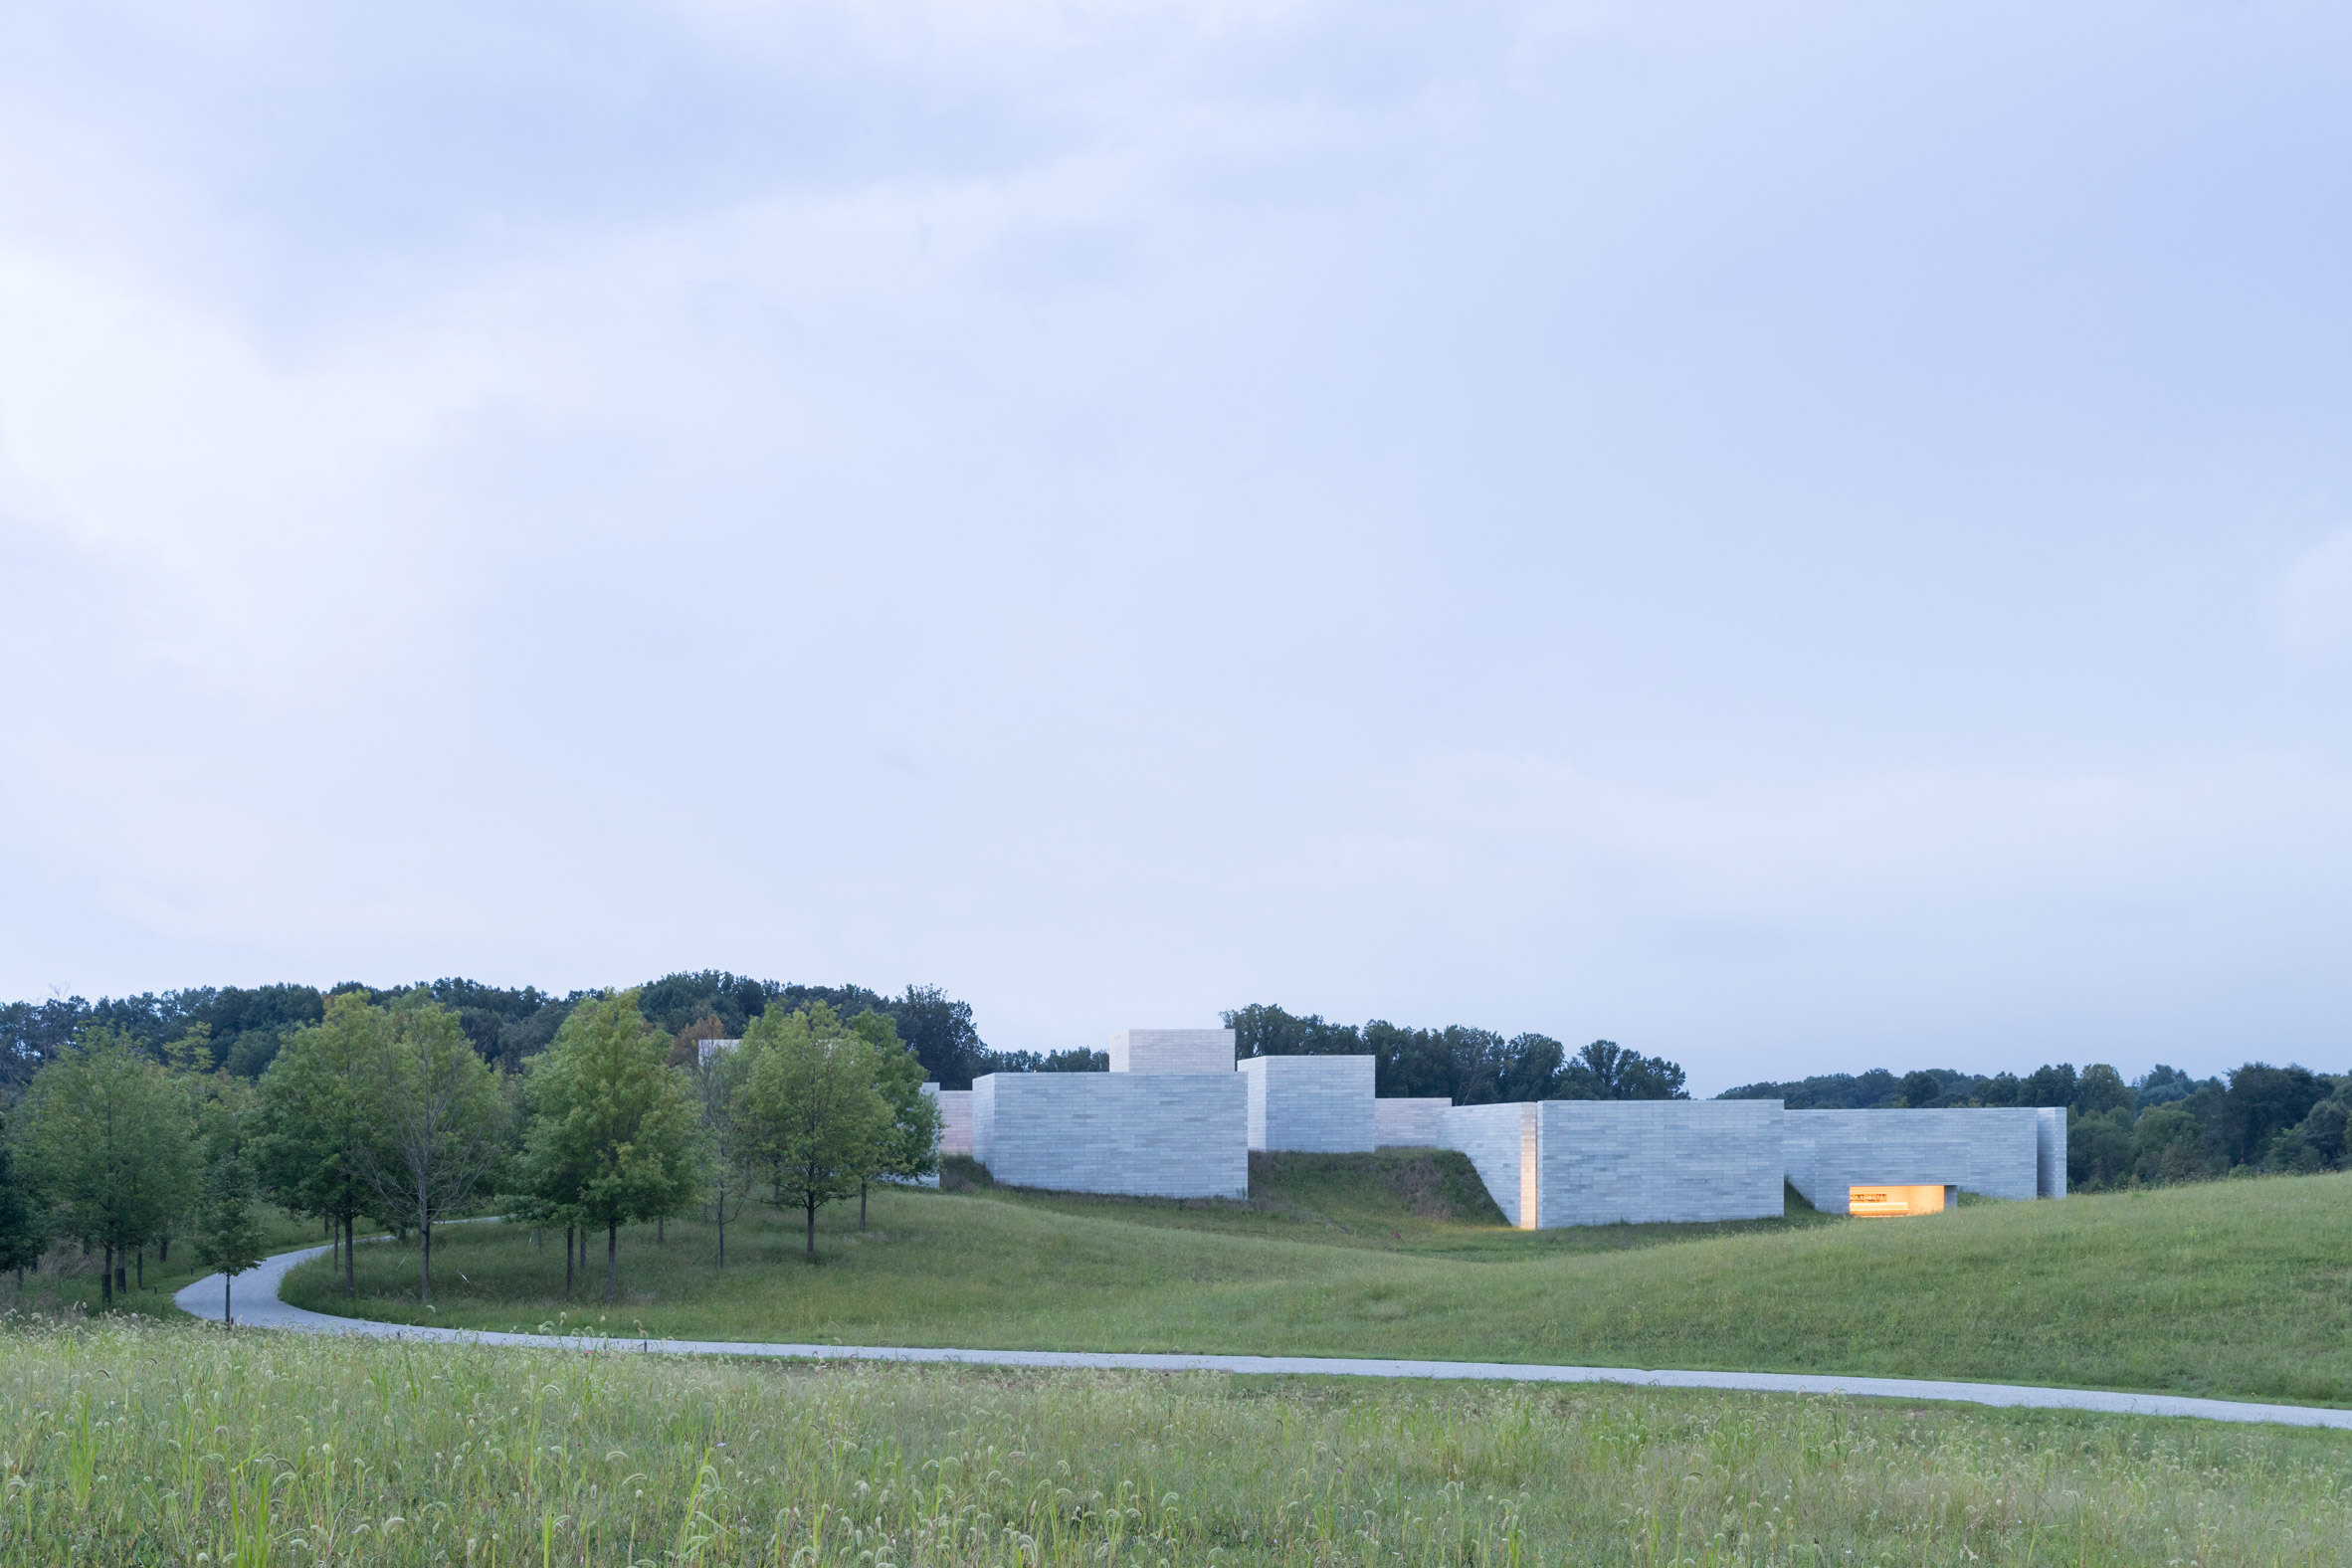 Glenstone Museum by Thomas Phifer and Partners